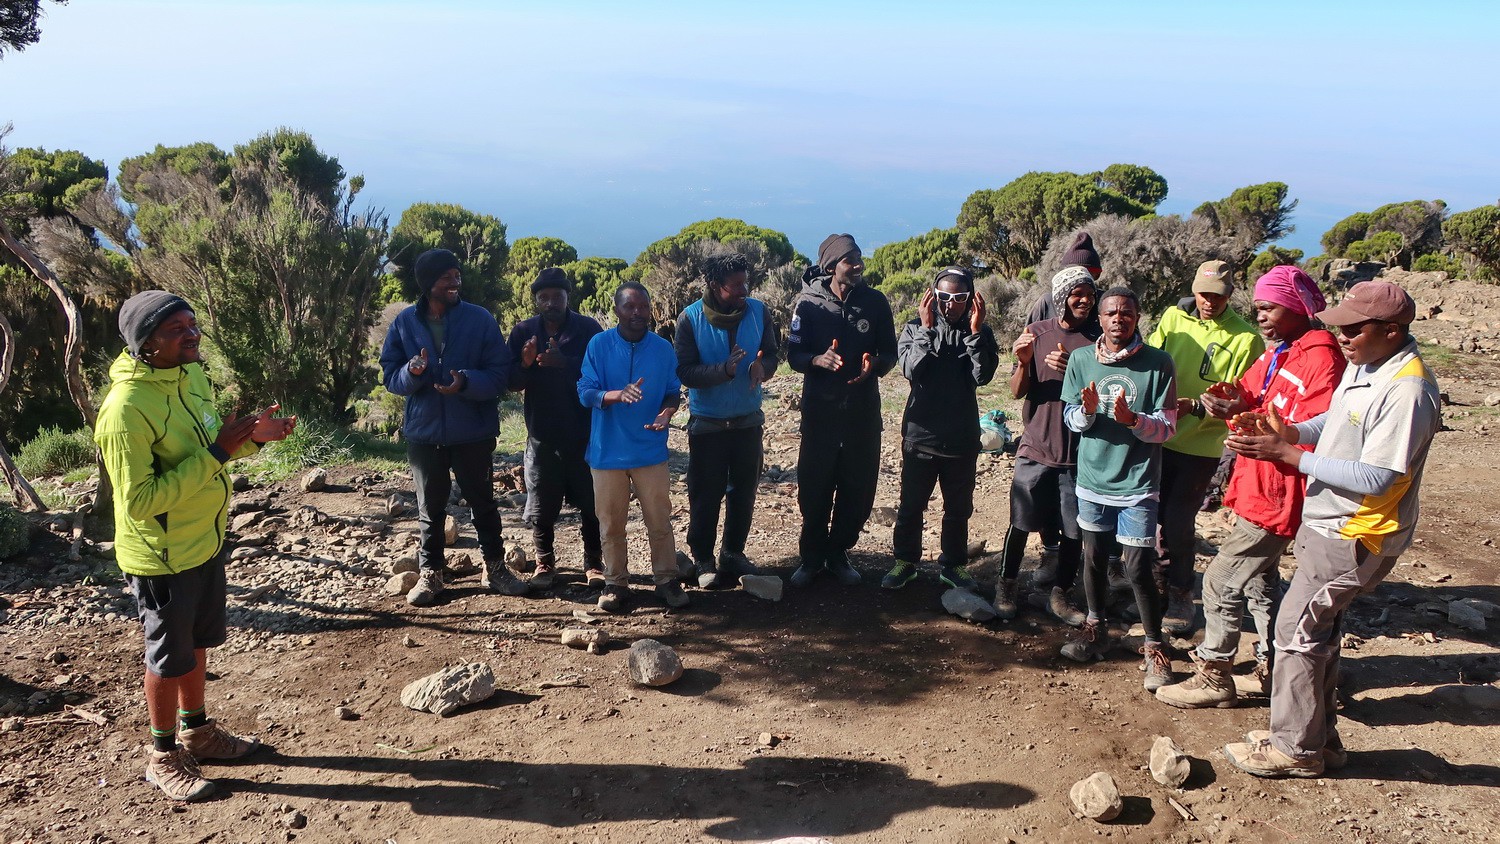 Our team on Kilimanjaro which did a splendid job